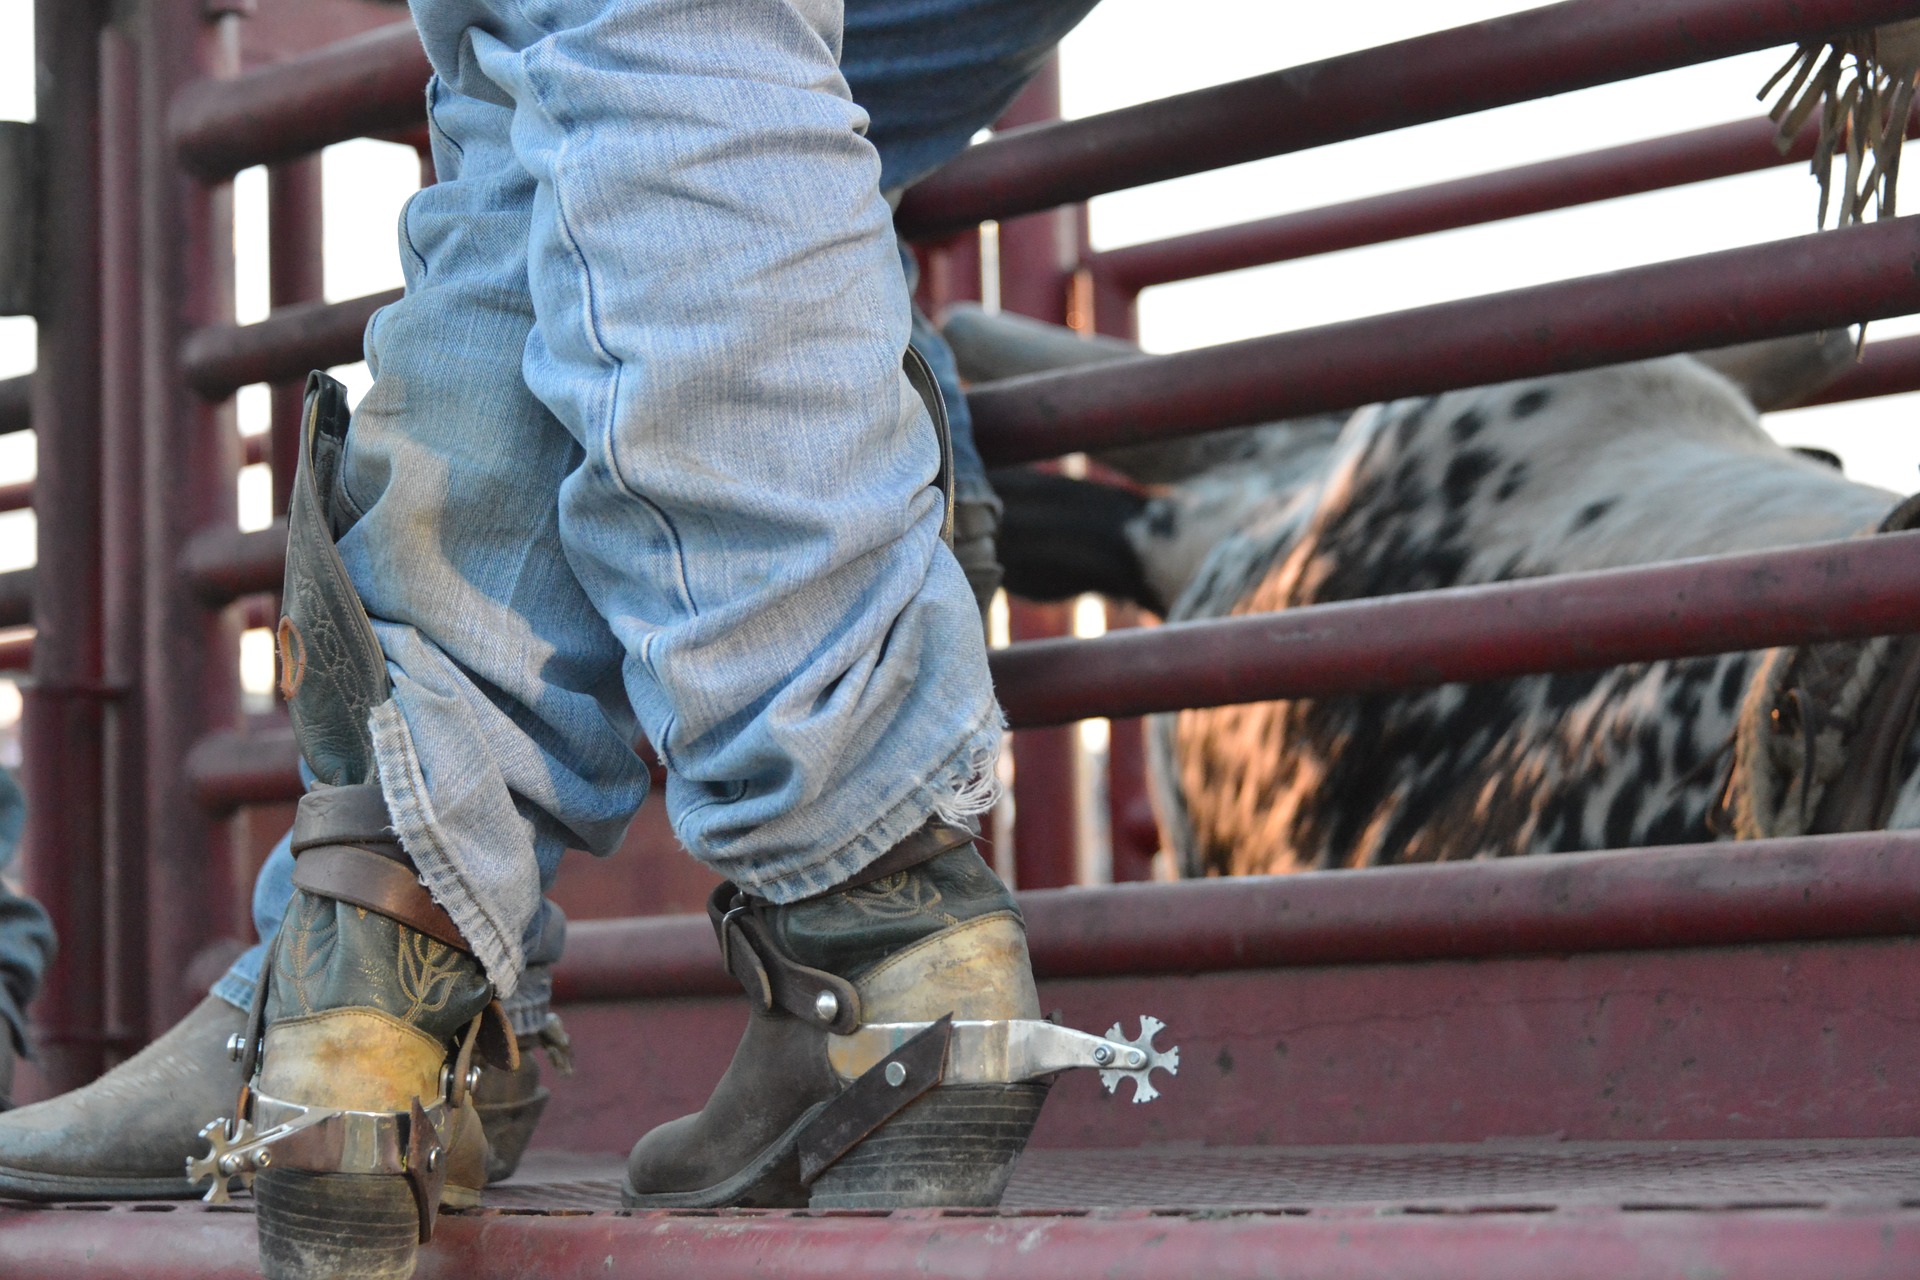 Why Do Horse Riders and Cowboys Wear Spurs on Their Boots?